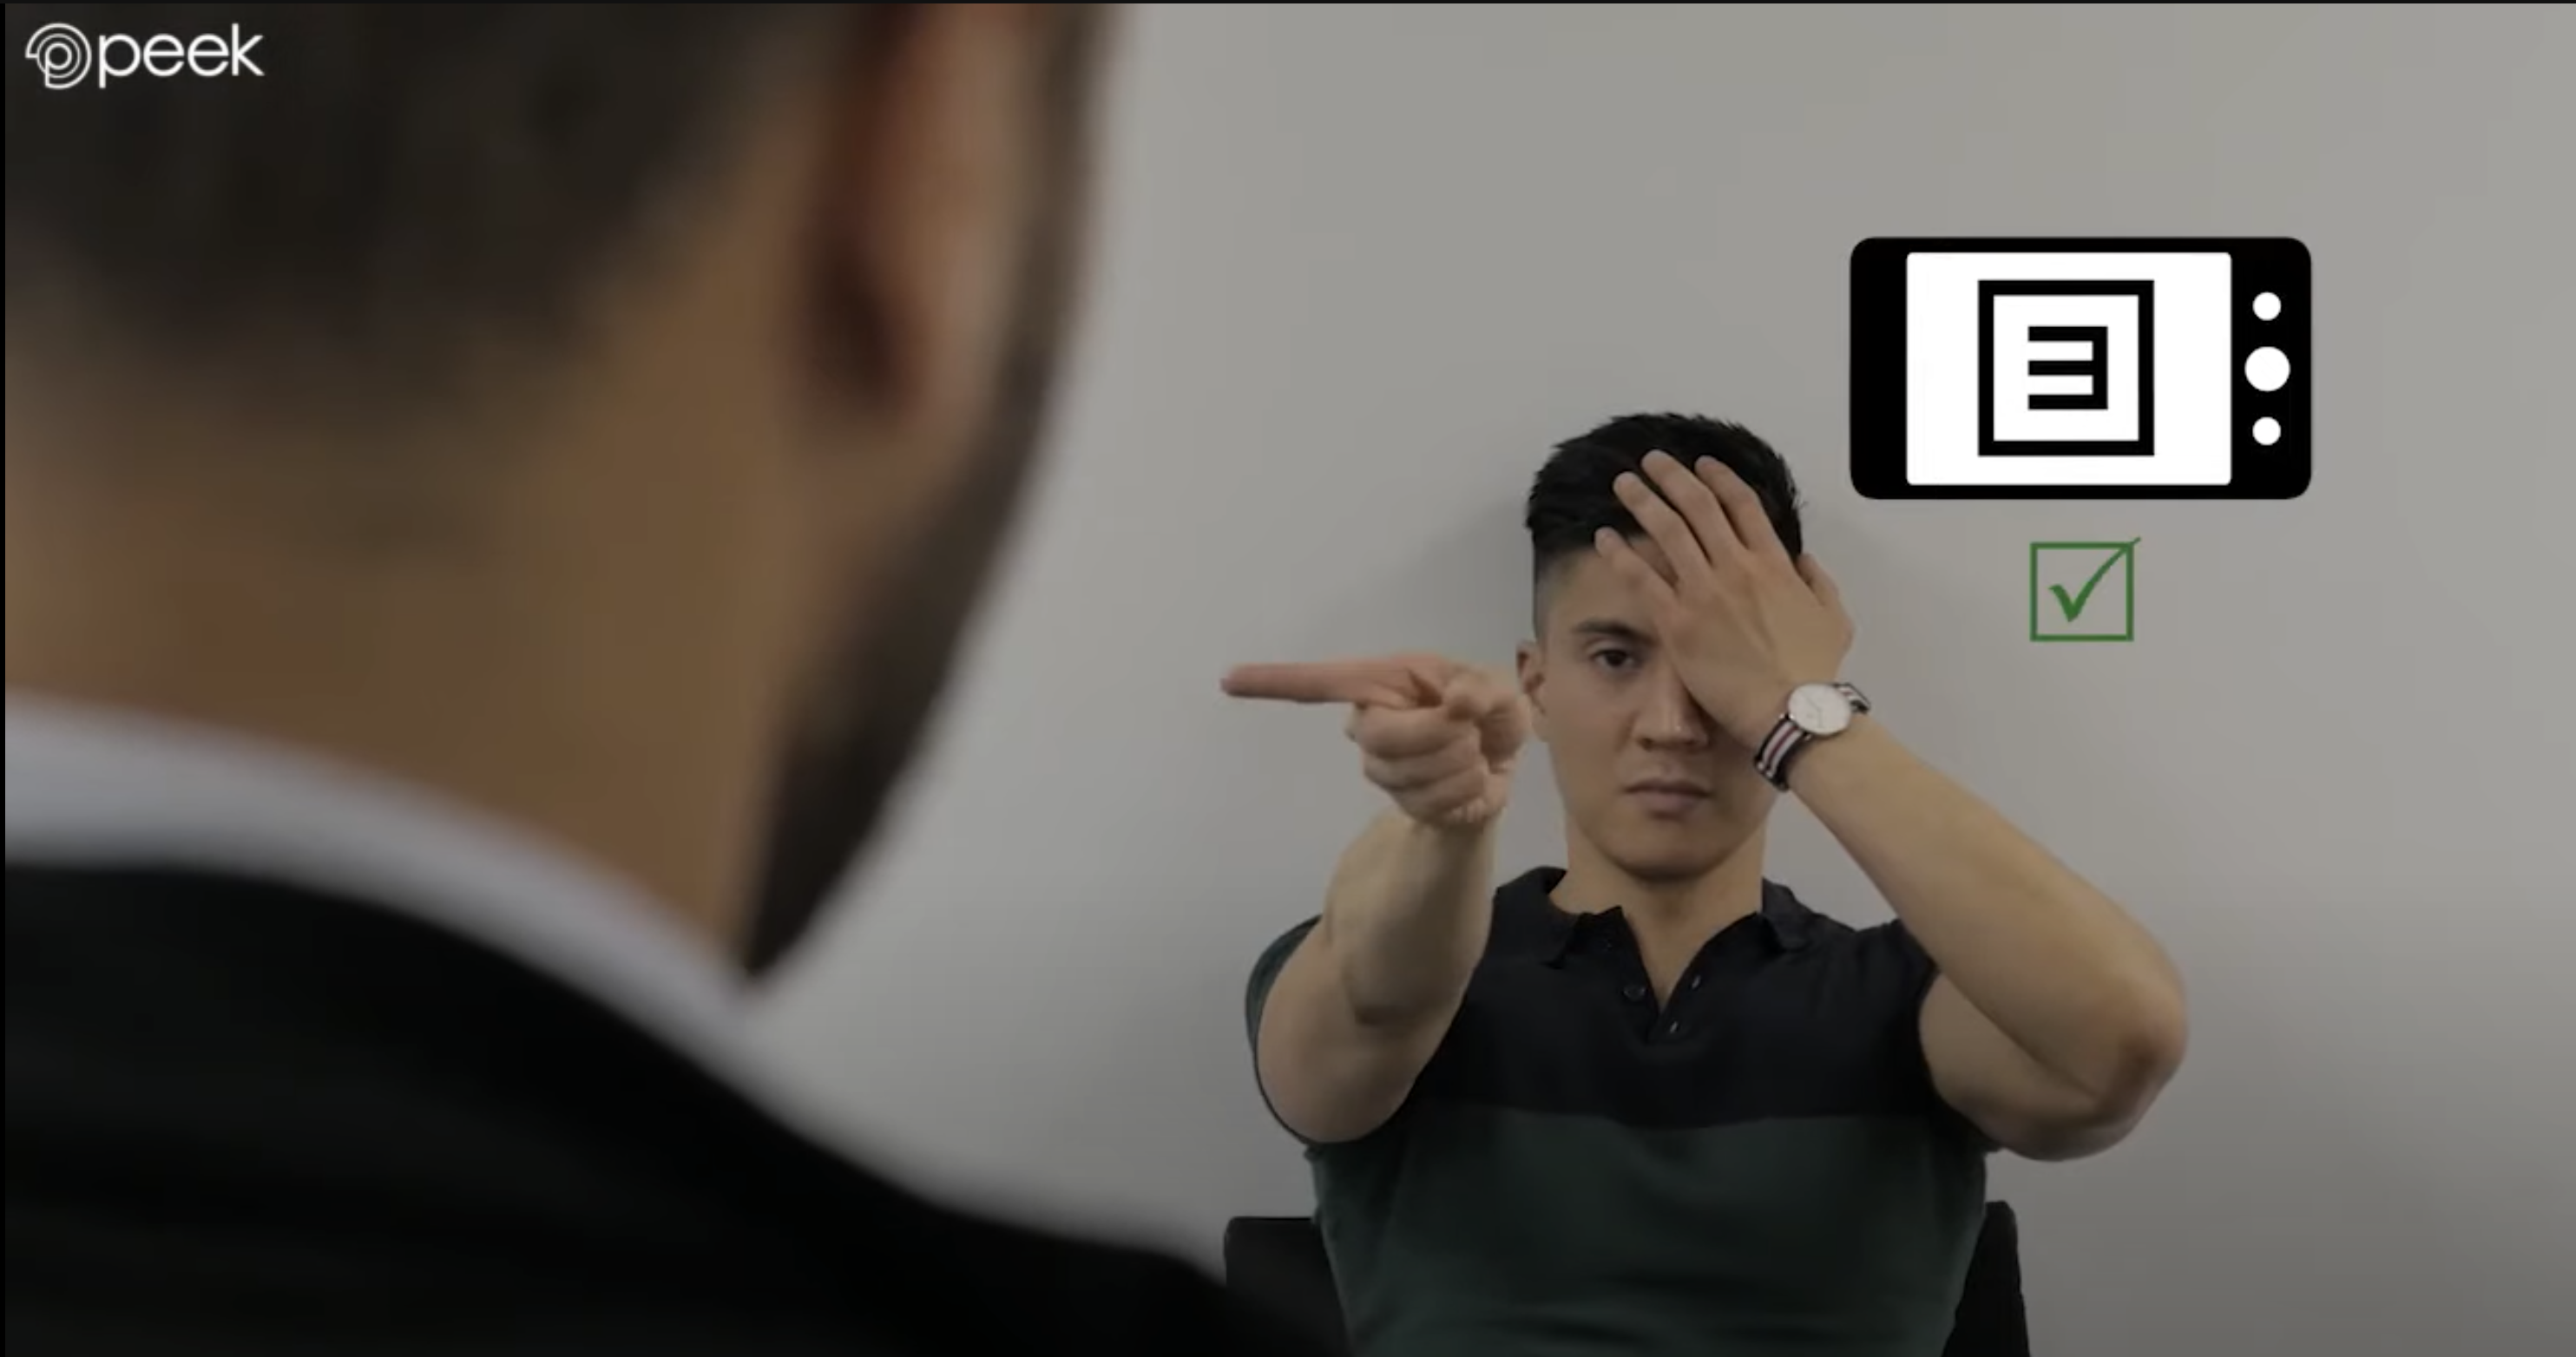 Screenshot from Peek Acuity tutorial video showing someone having their vision screened using the app.